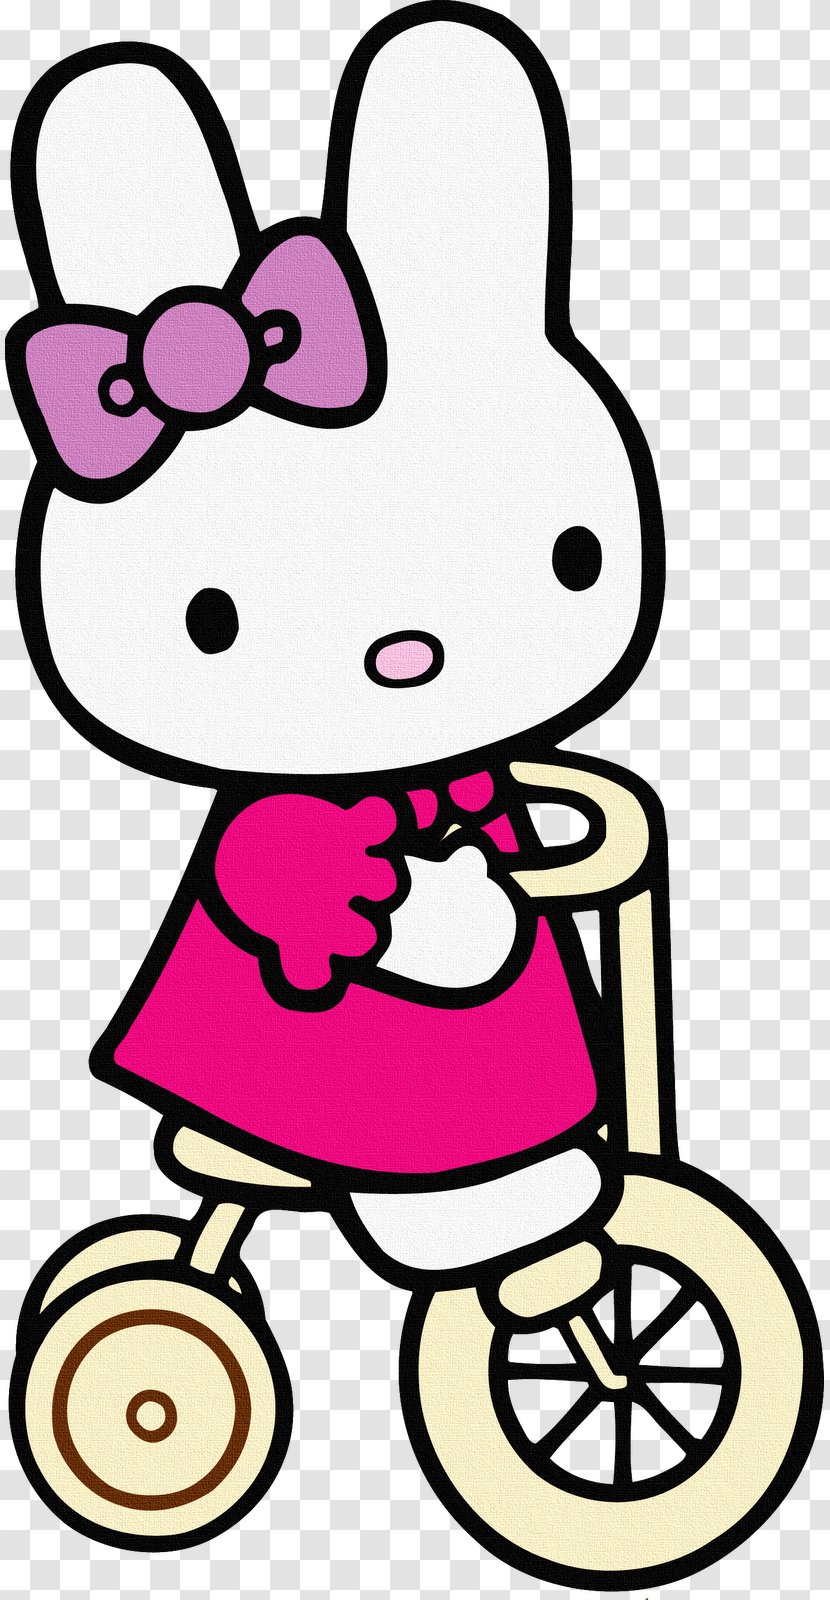 Hello Kitty IPhone 6 Plus Samsung Galaxy S6 Photography Desktop Wallpaper Transparent PNG